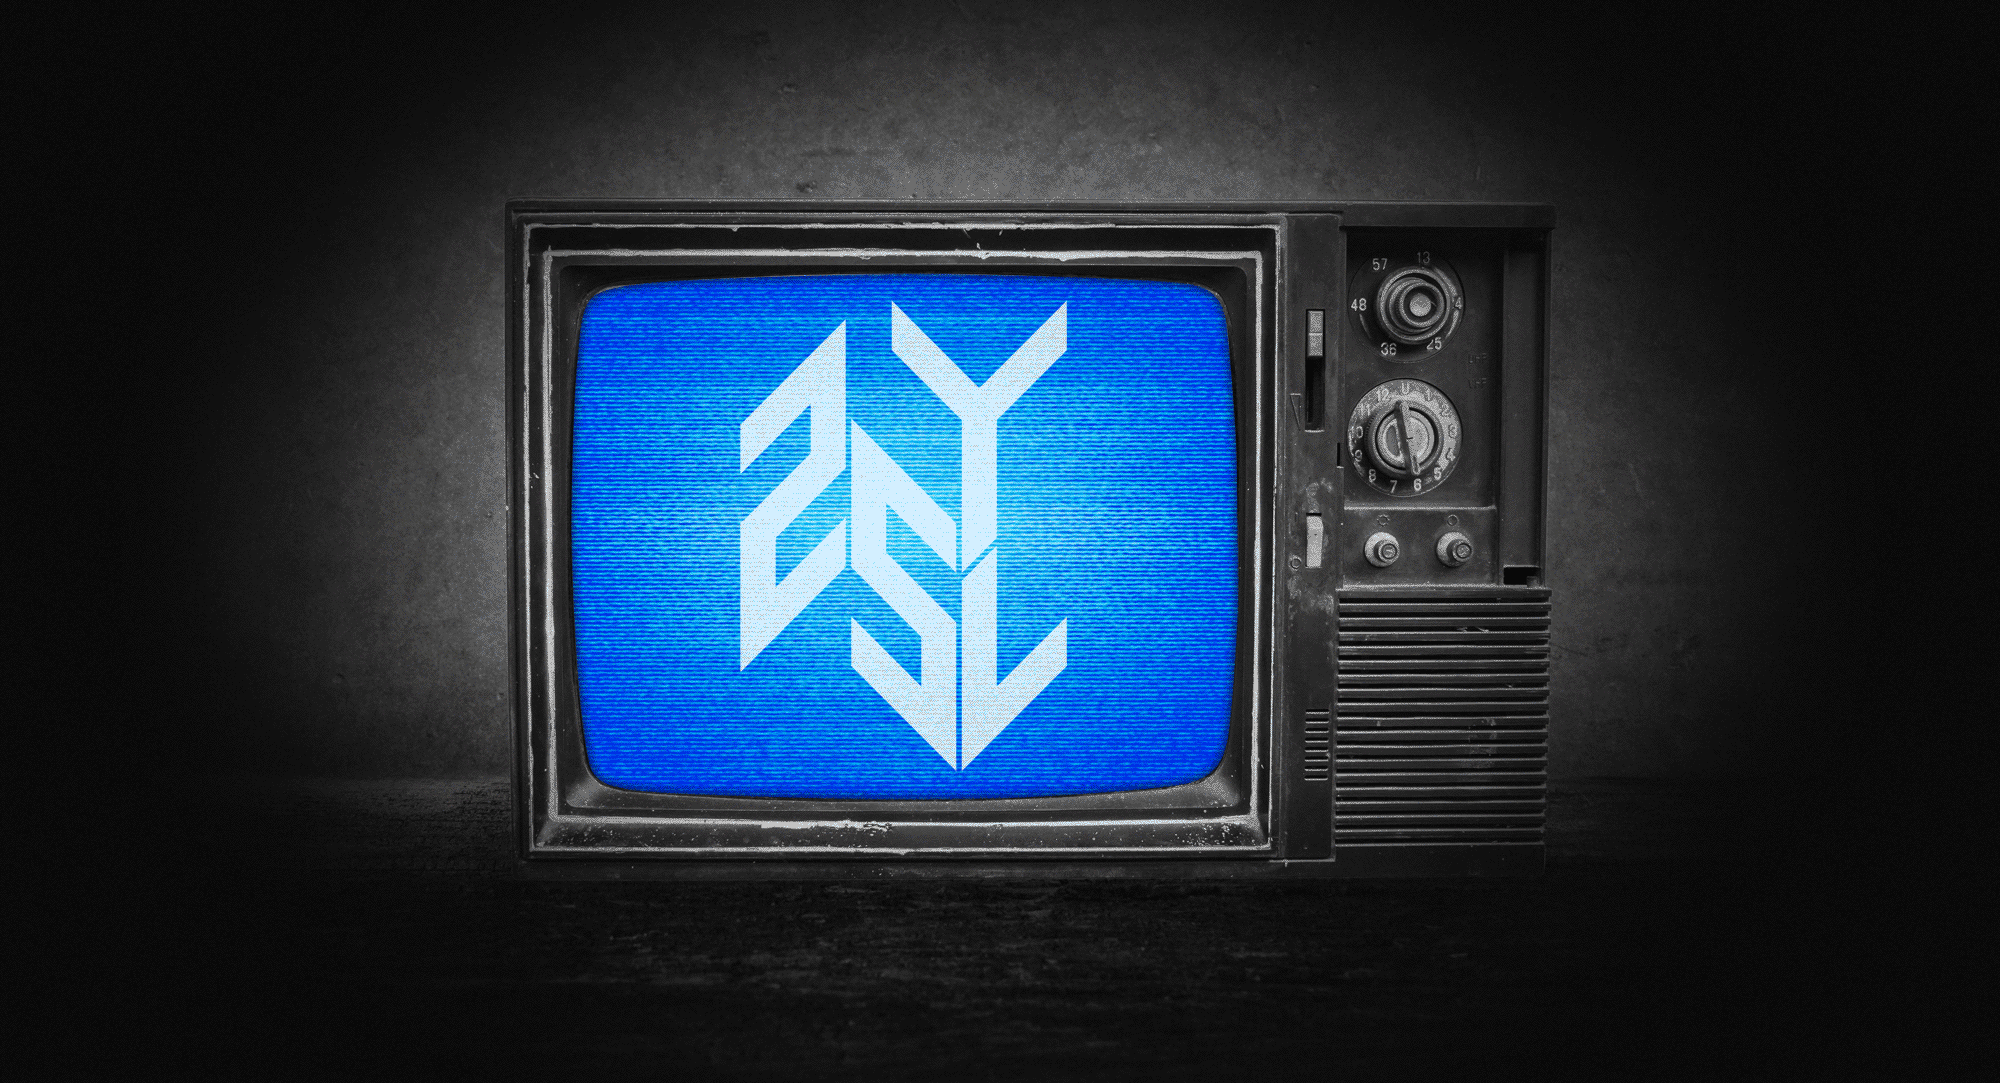 25YL television